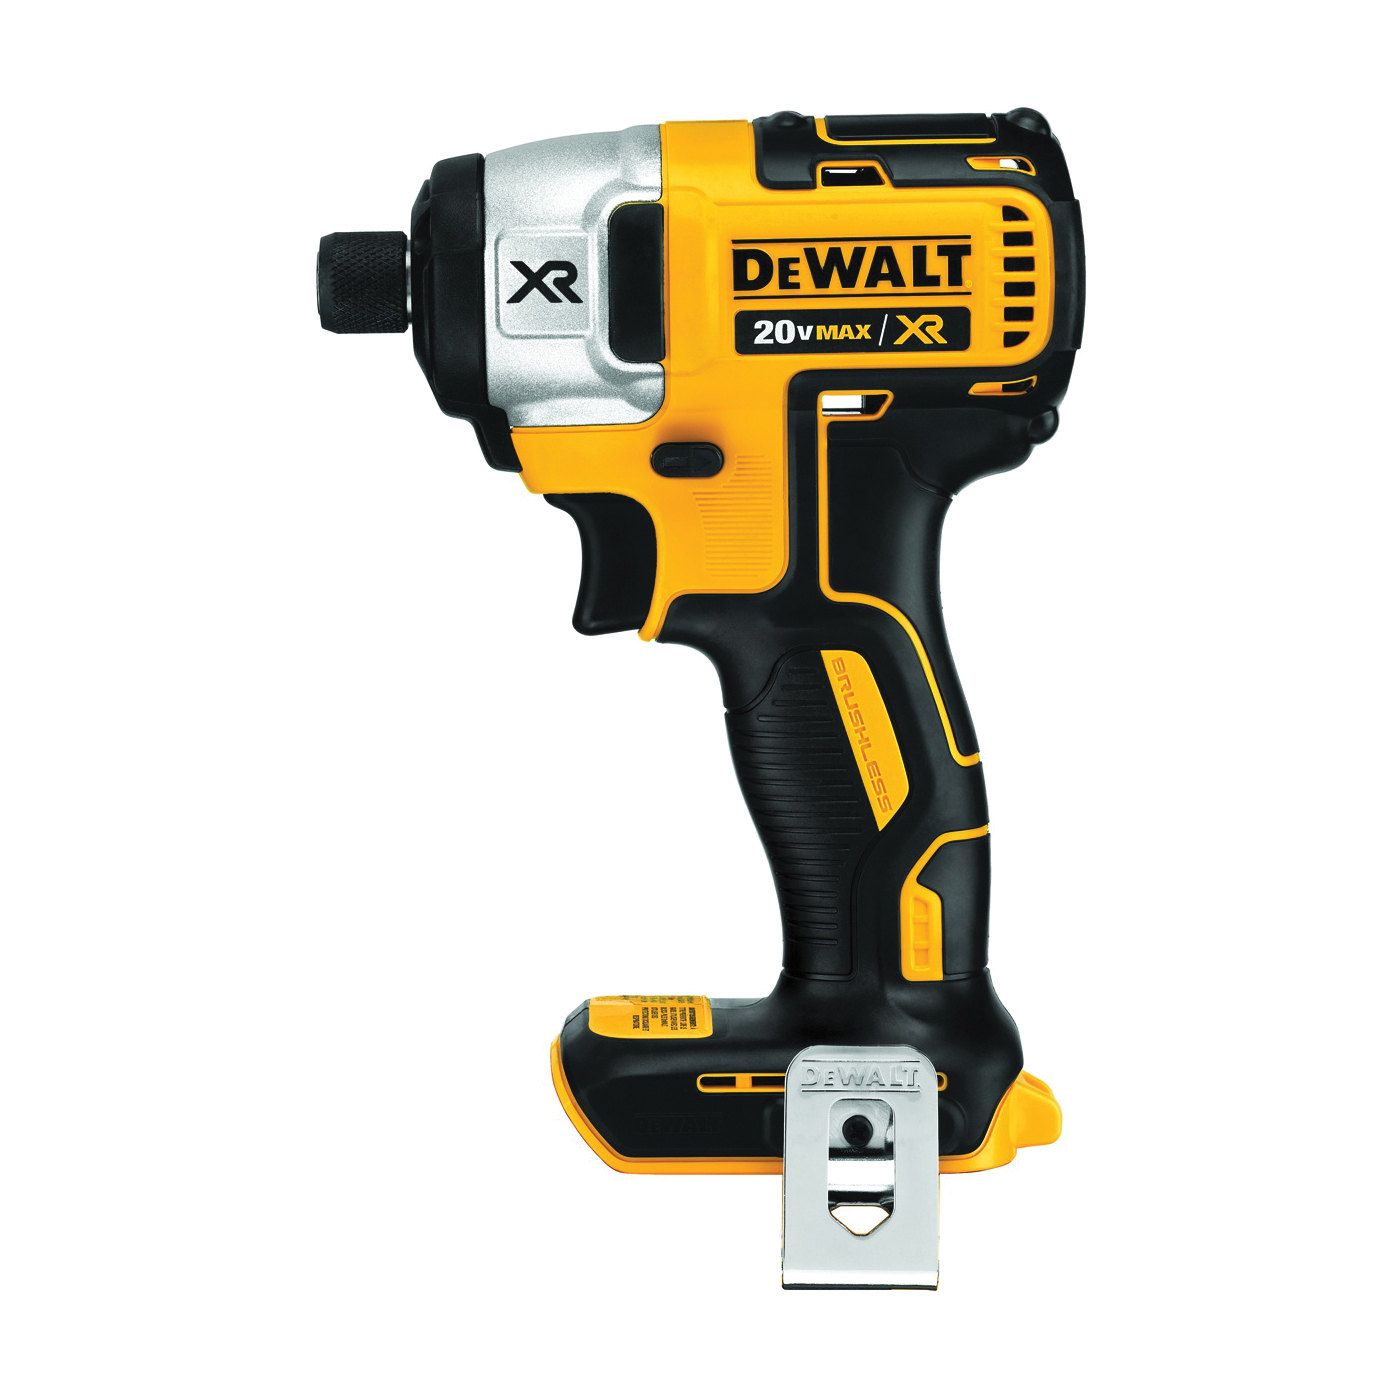 DeWALT DCF887B/DCF886B Impact Driver, Tool Only, 20 V, 2 Ah, 1/4 in Drive, Hex Drive, 3800 ipm, 0 to 3250 rpm Speed - 2